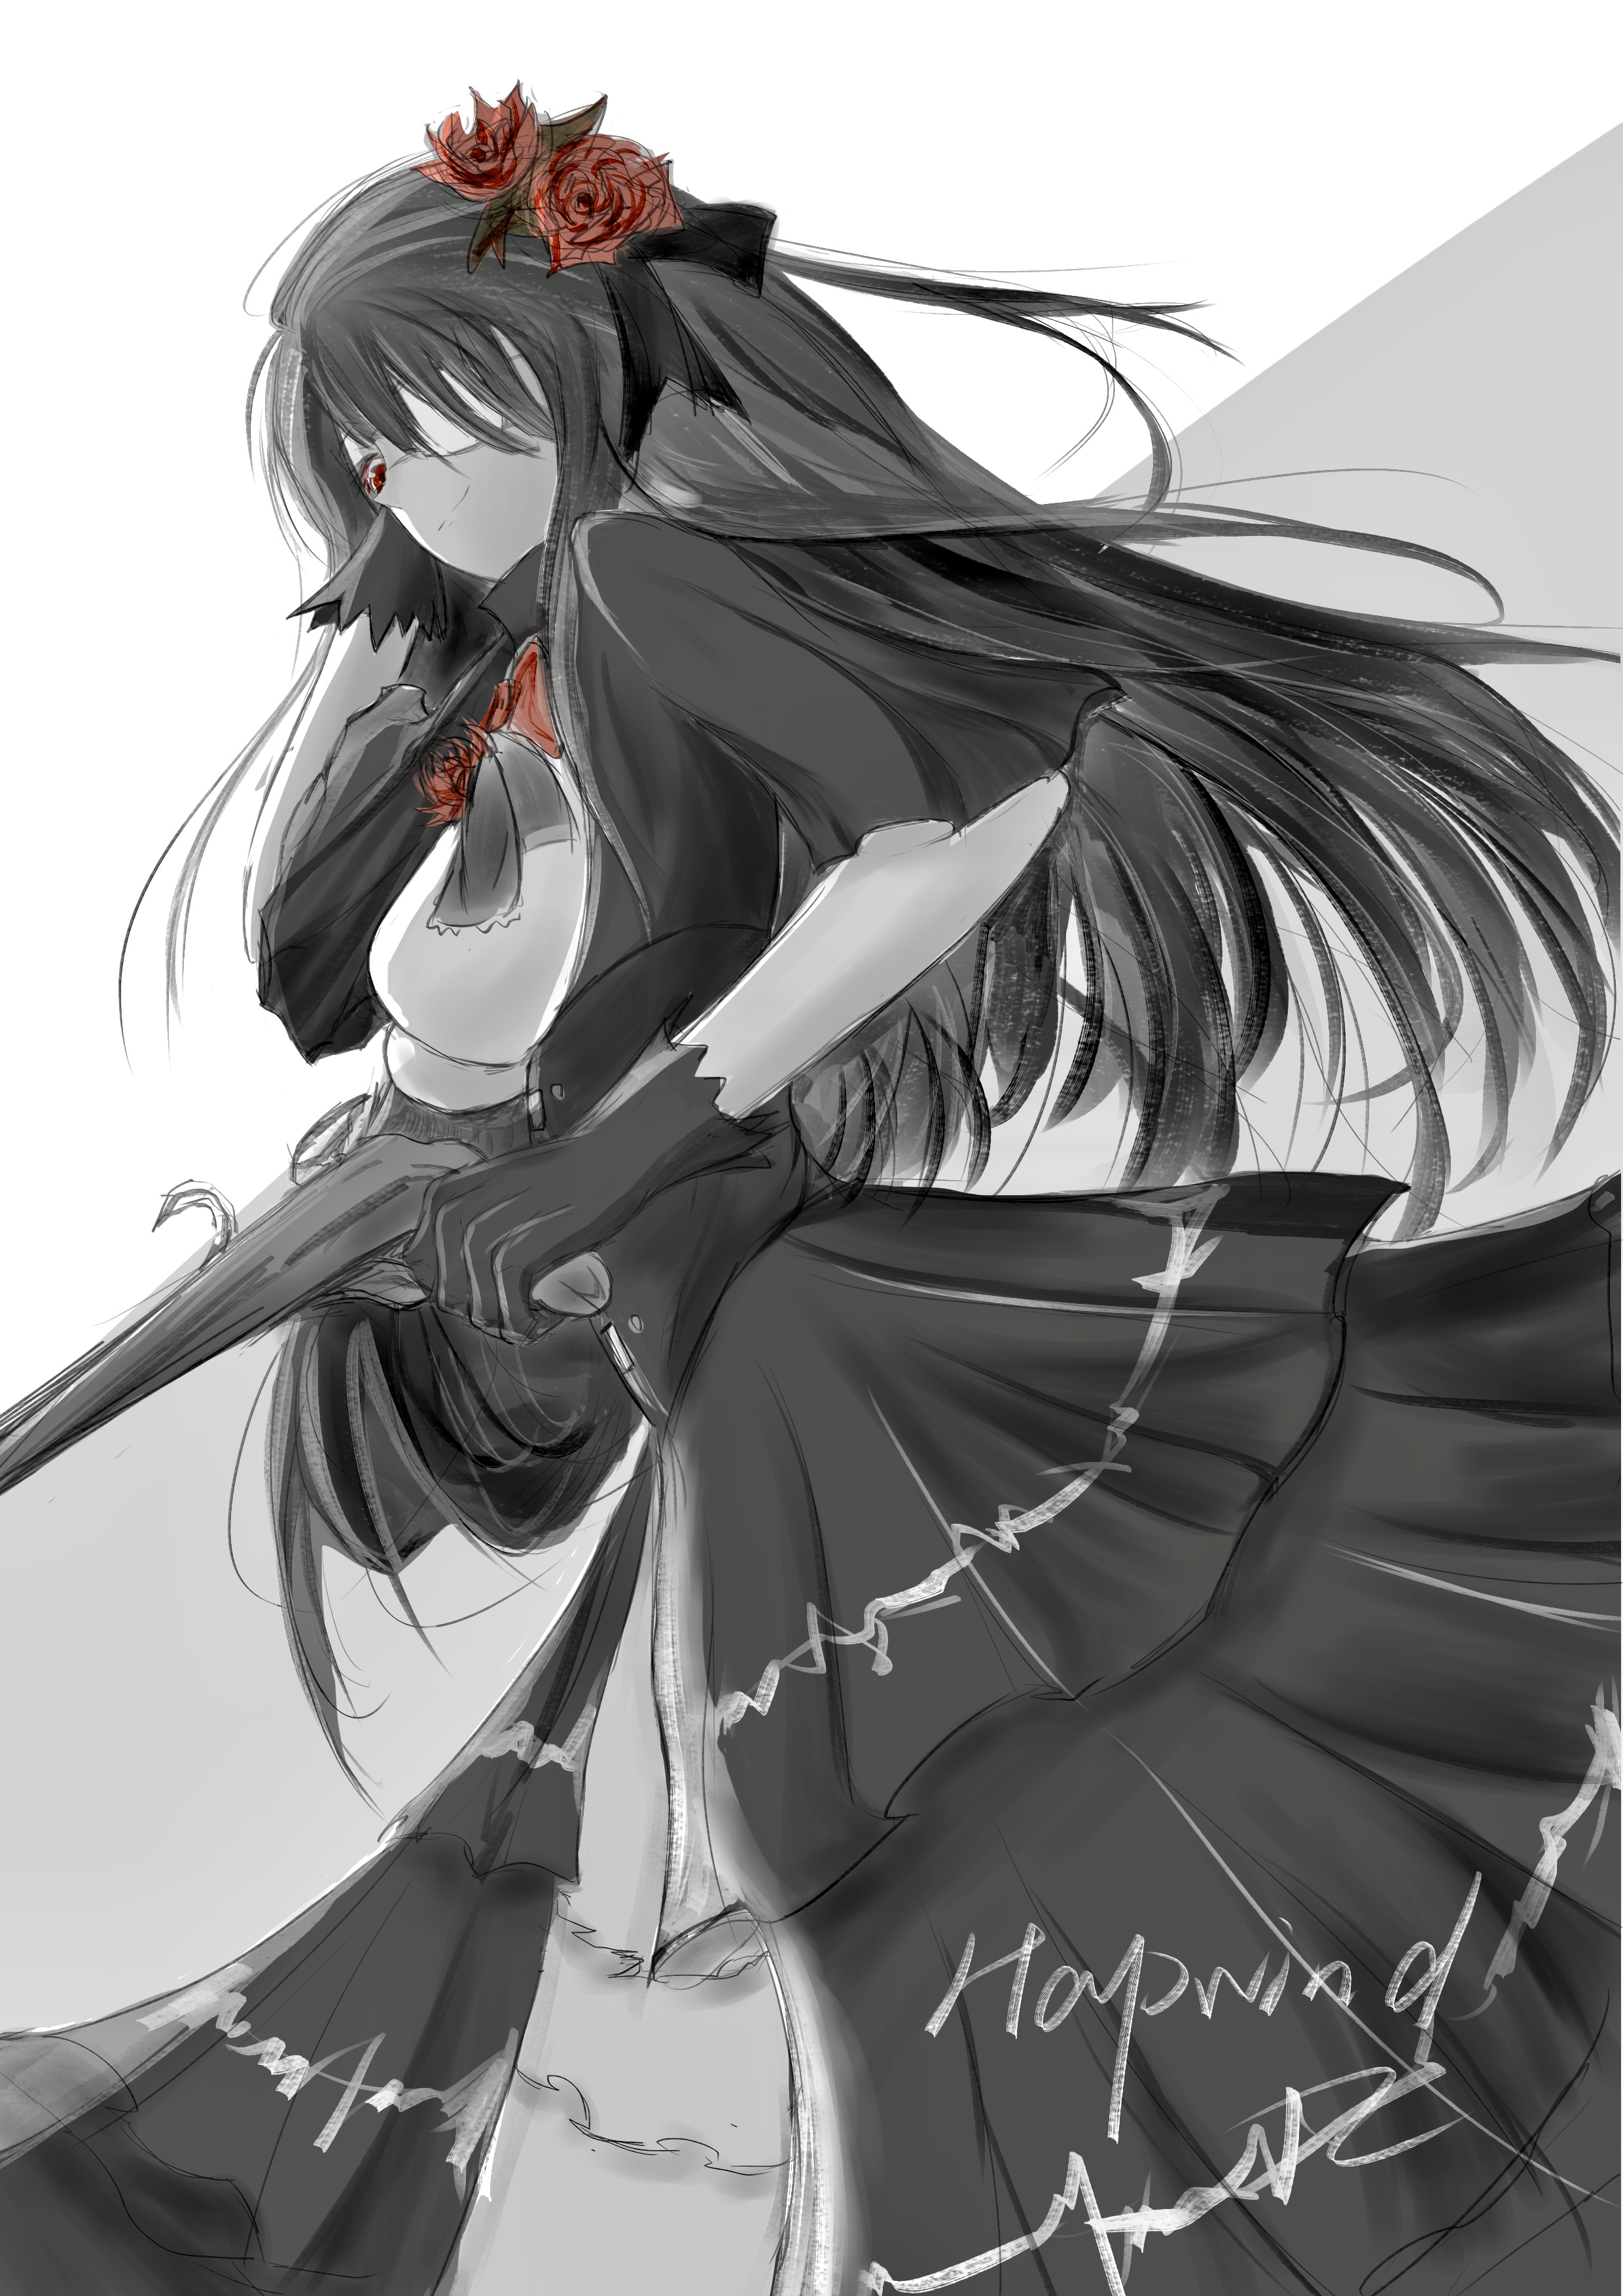 Anime Anime Girls Flower In Hair Long Hair Weapon Gun Women With Weapons Red Flowers Simple Backgrou 2480x3508